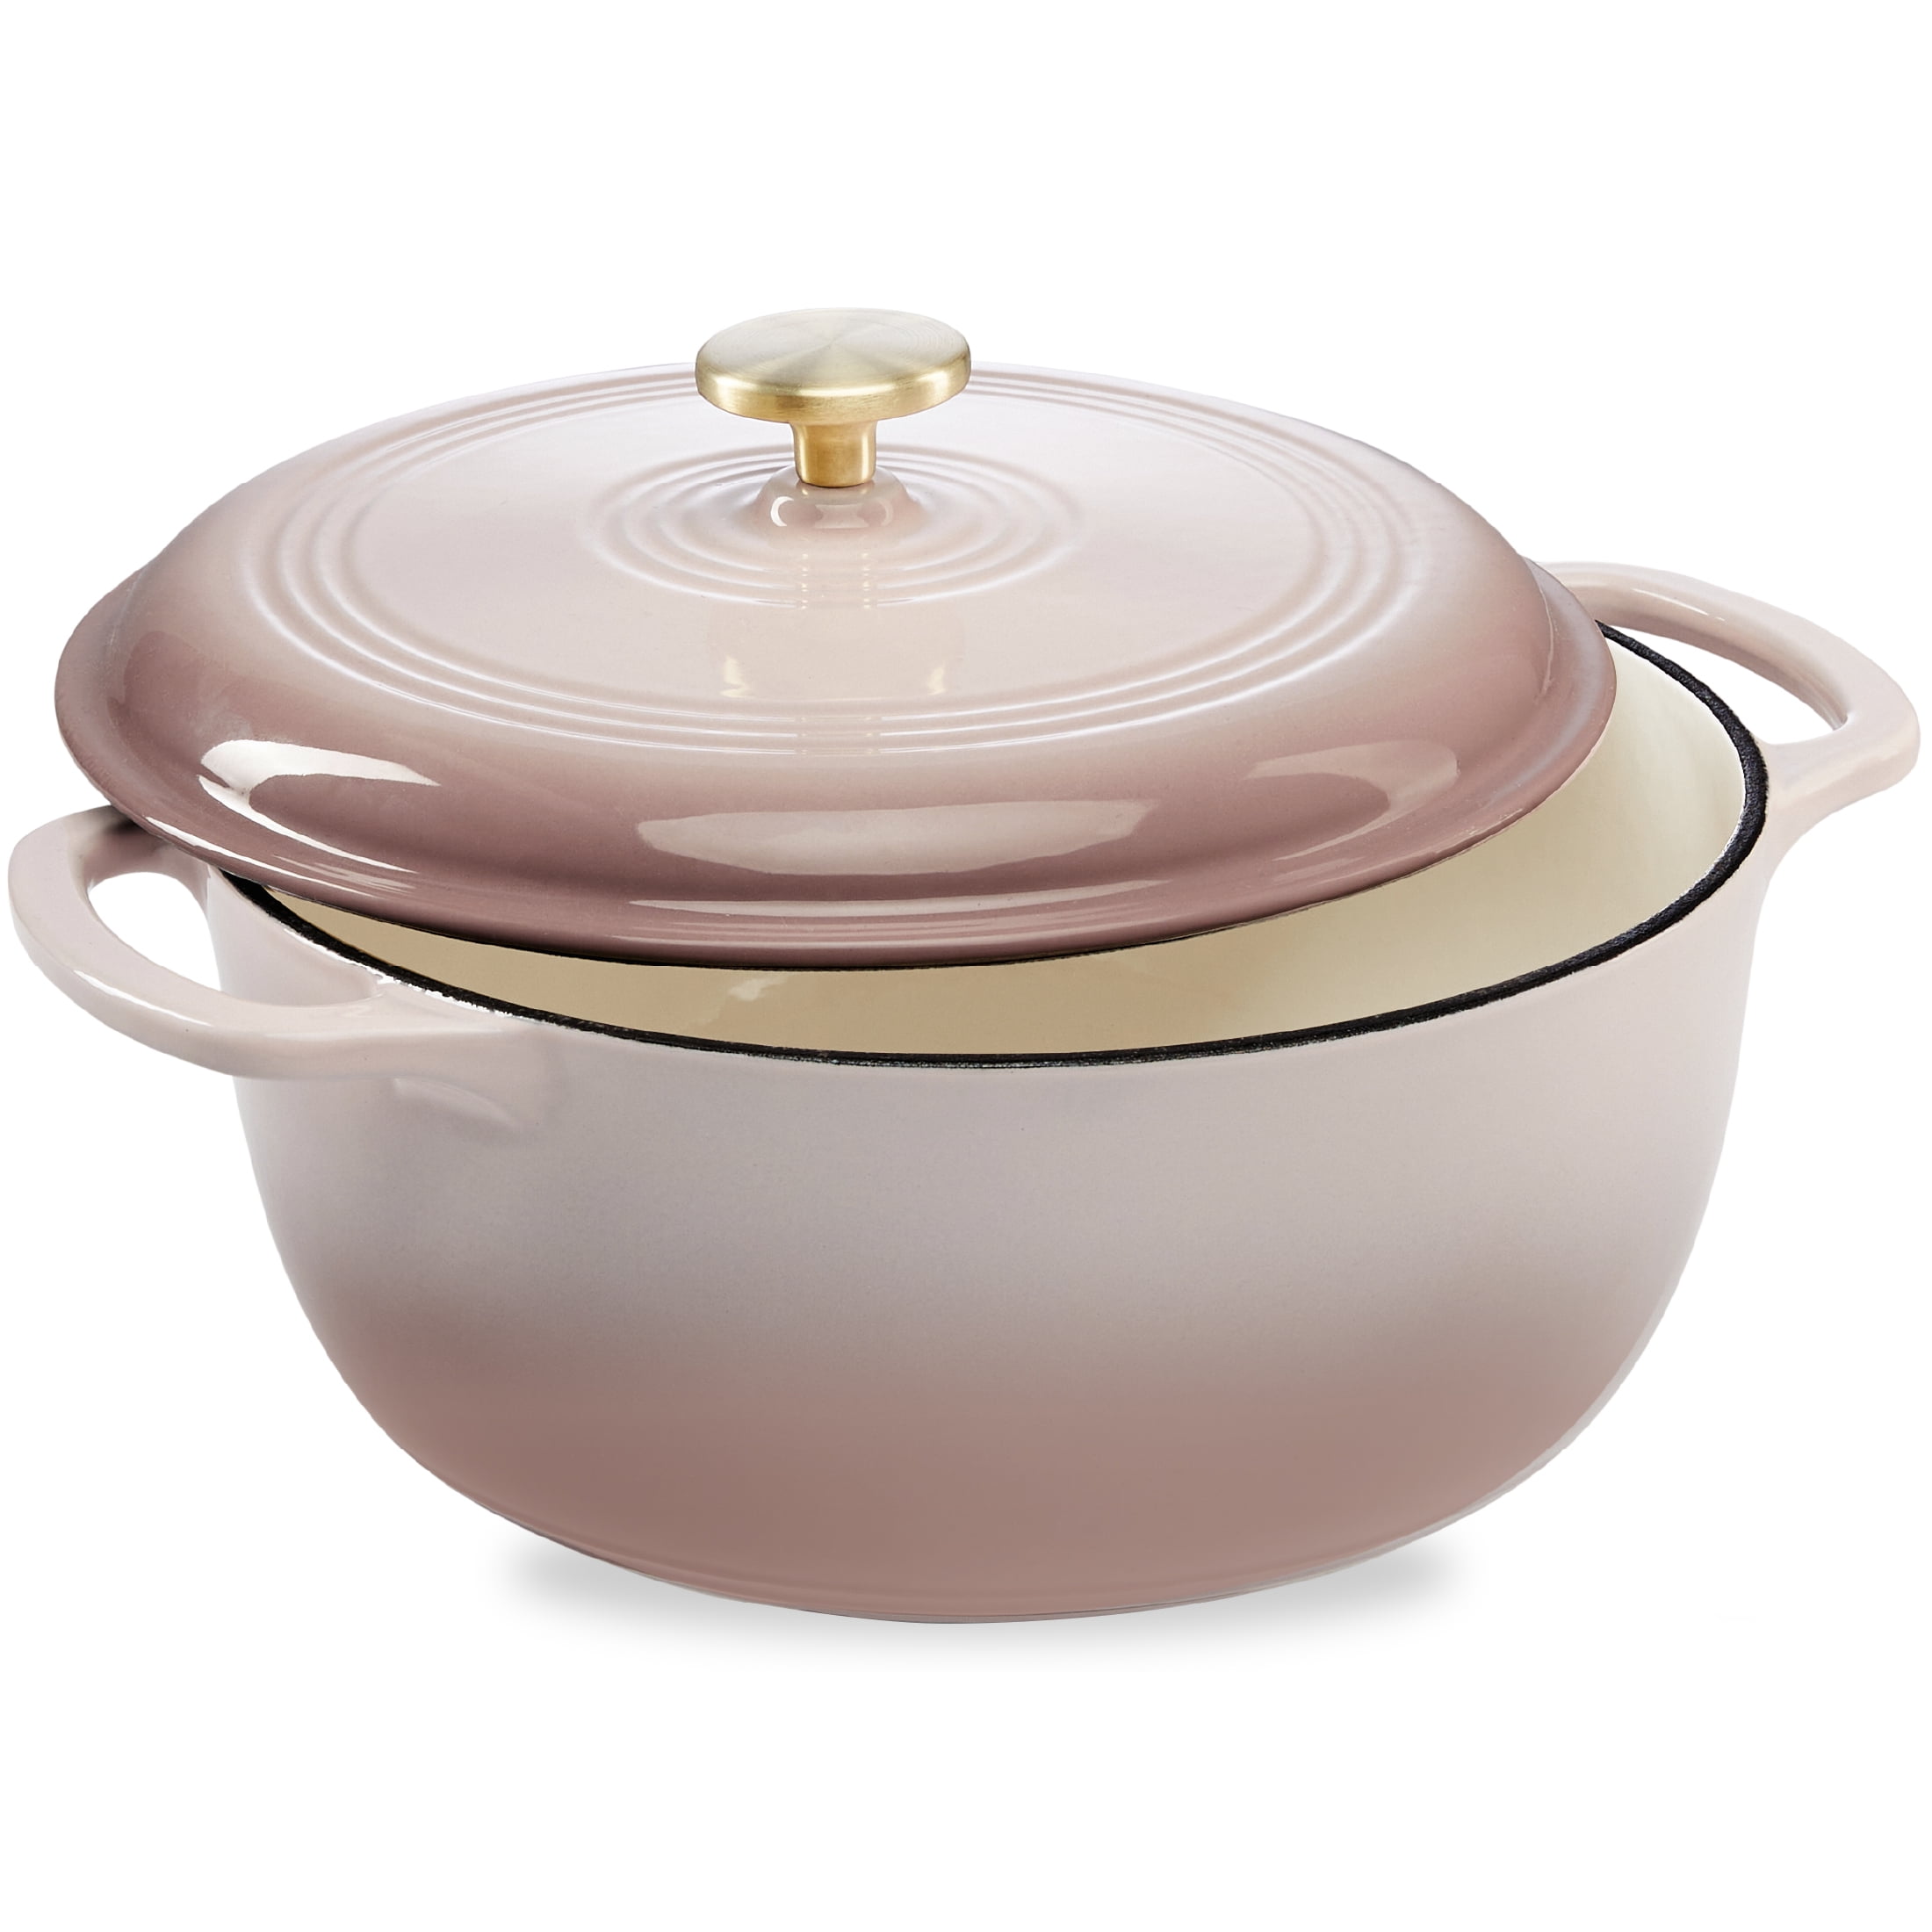  6 Quart Enameled Cast Iron Dutch Oven Pot with Lid — Round  Enamel Coating, Safe up to 500° F, Dual Side Handles, Ideal for Baking,  Roasting and Cooking — Oven Compatible